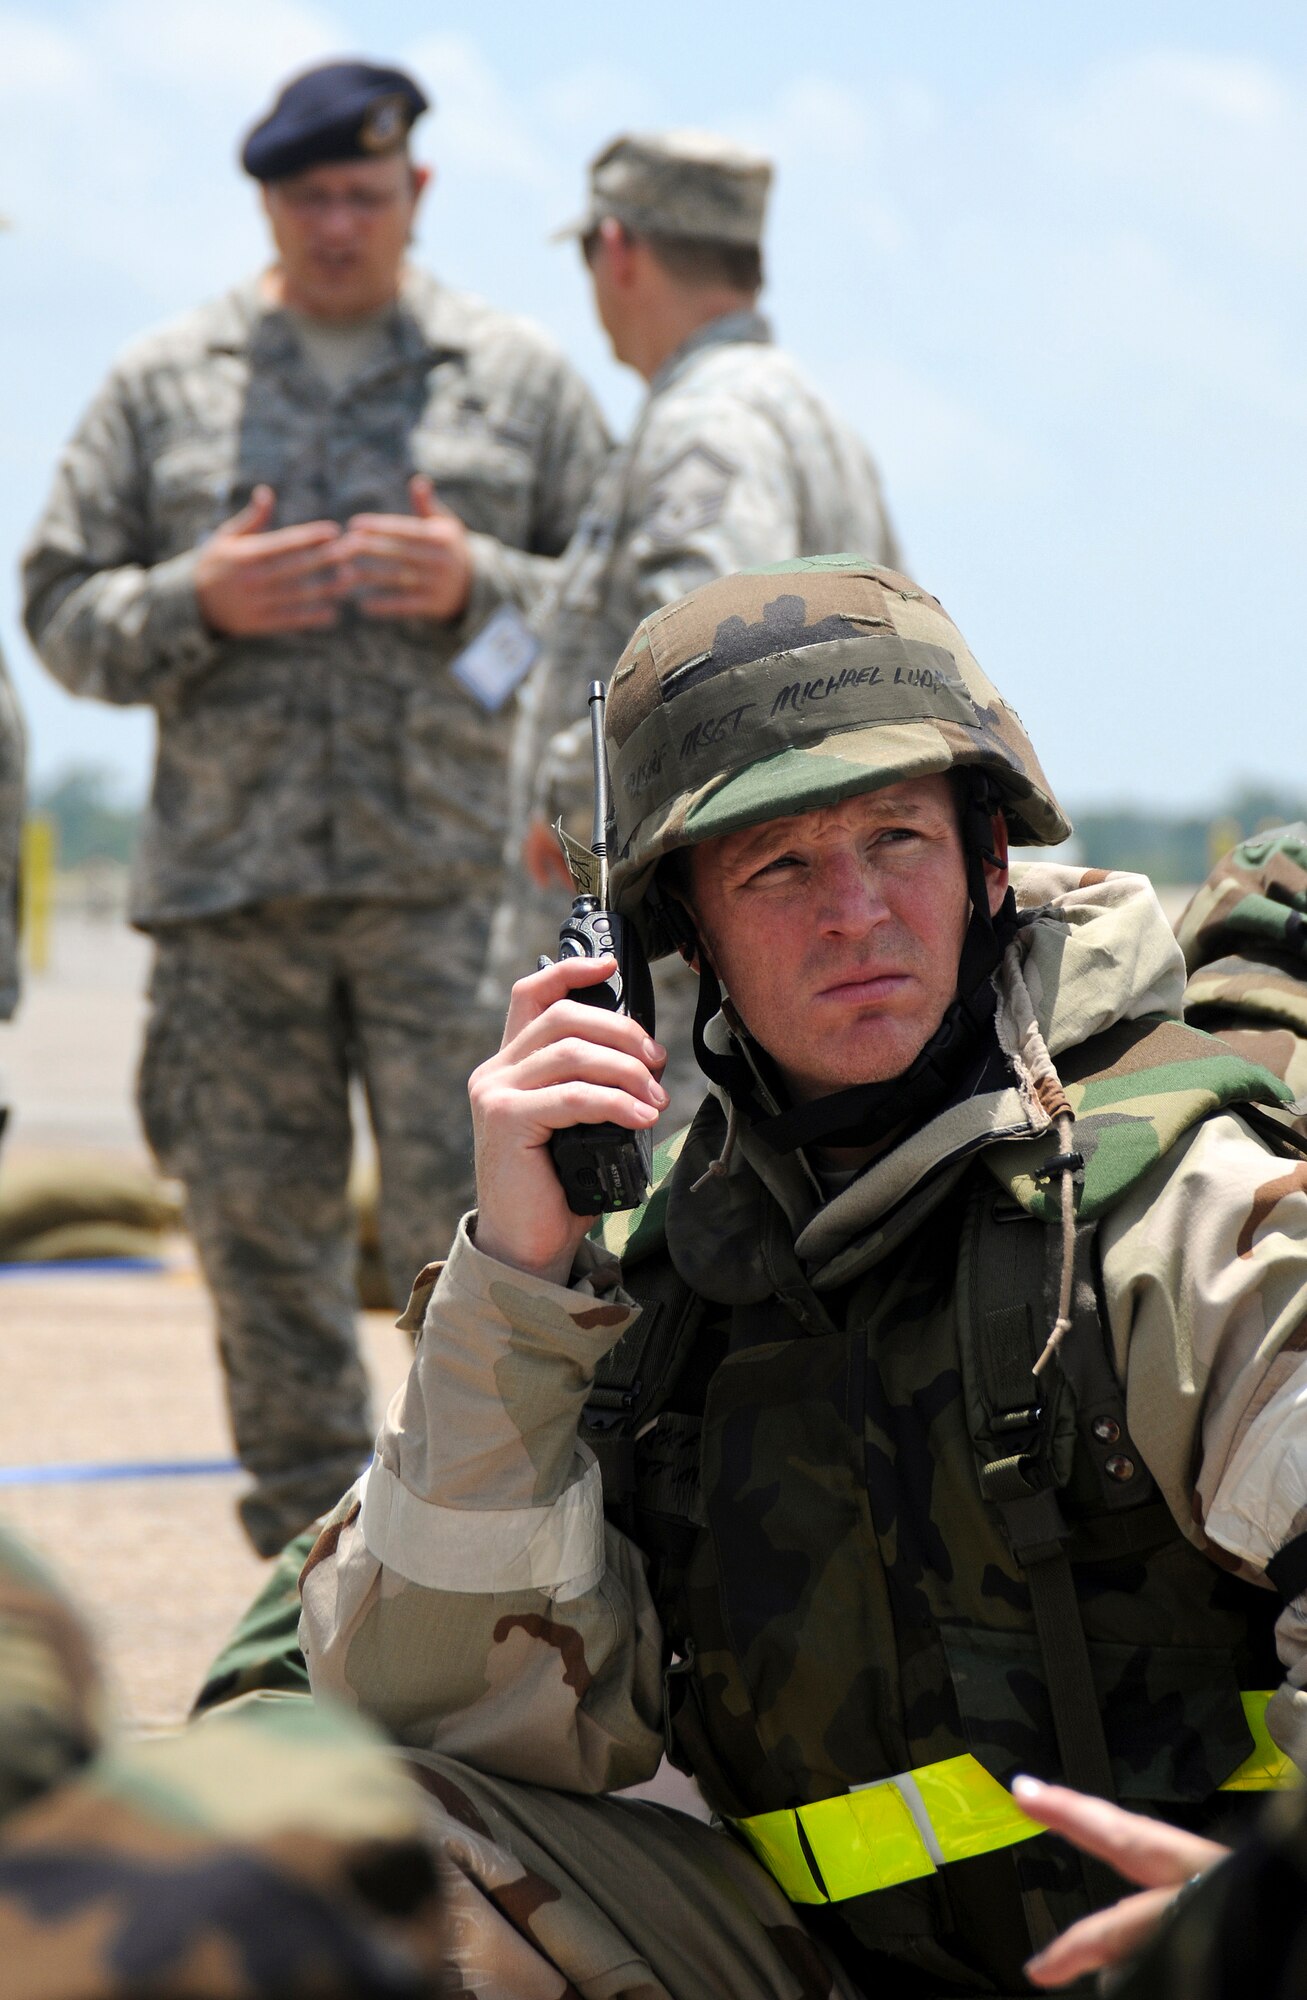 Master Sgt. Michael Ludke, an Nuclear-Biological-Chemical Warfare cell chief from the 123rd Airlift Wing, upchannels information during an evacuation of his building following a simulated attack May 20, 2010 at the Gulfport Combat Readiness Training Center in Gulfport, Miss. The 123rd and two other units were being evaluated for wartime readiness as part of an Air Mobility Command Operational Readiness Inspection. The ORI was unique in that it marked the first time inspectors evaluated a unit's performance in defense of the United States, using scenarios that played out on American soil rather than a simulated overseas environment. (U.S. Air Force photo/Tech. Sgt. Dennis Flora) (Released)